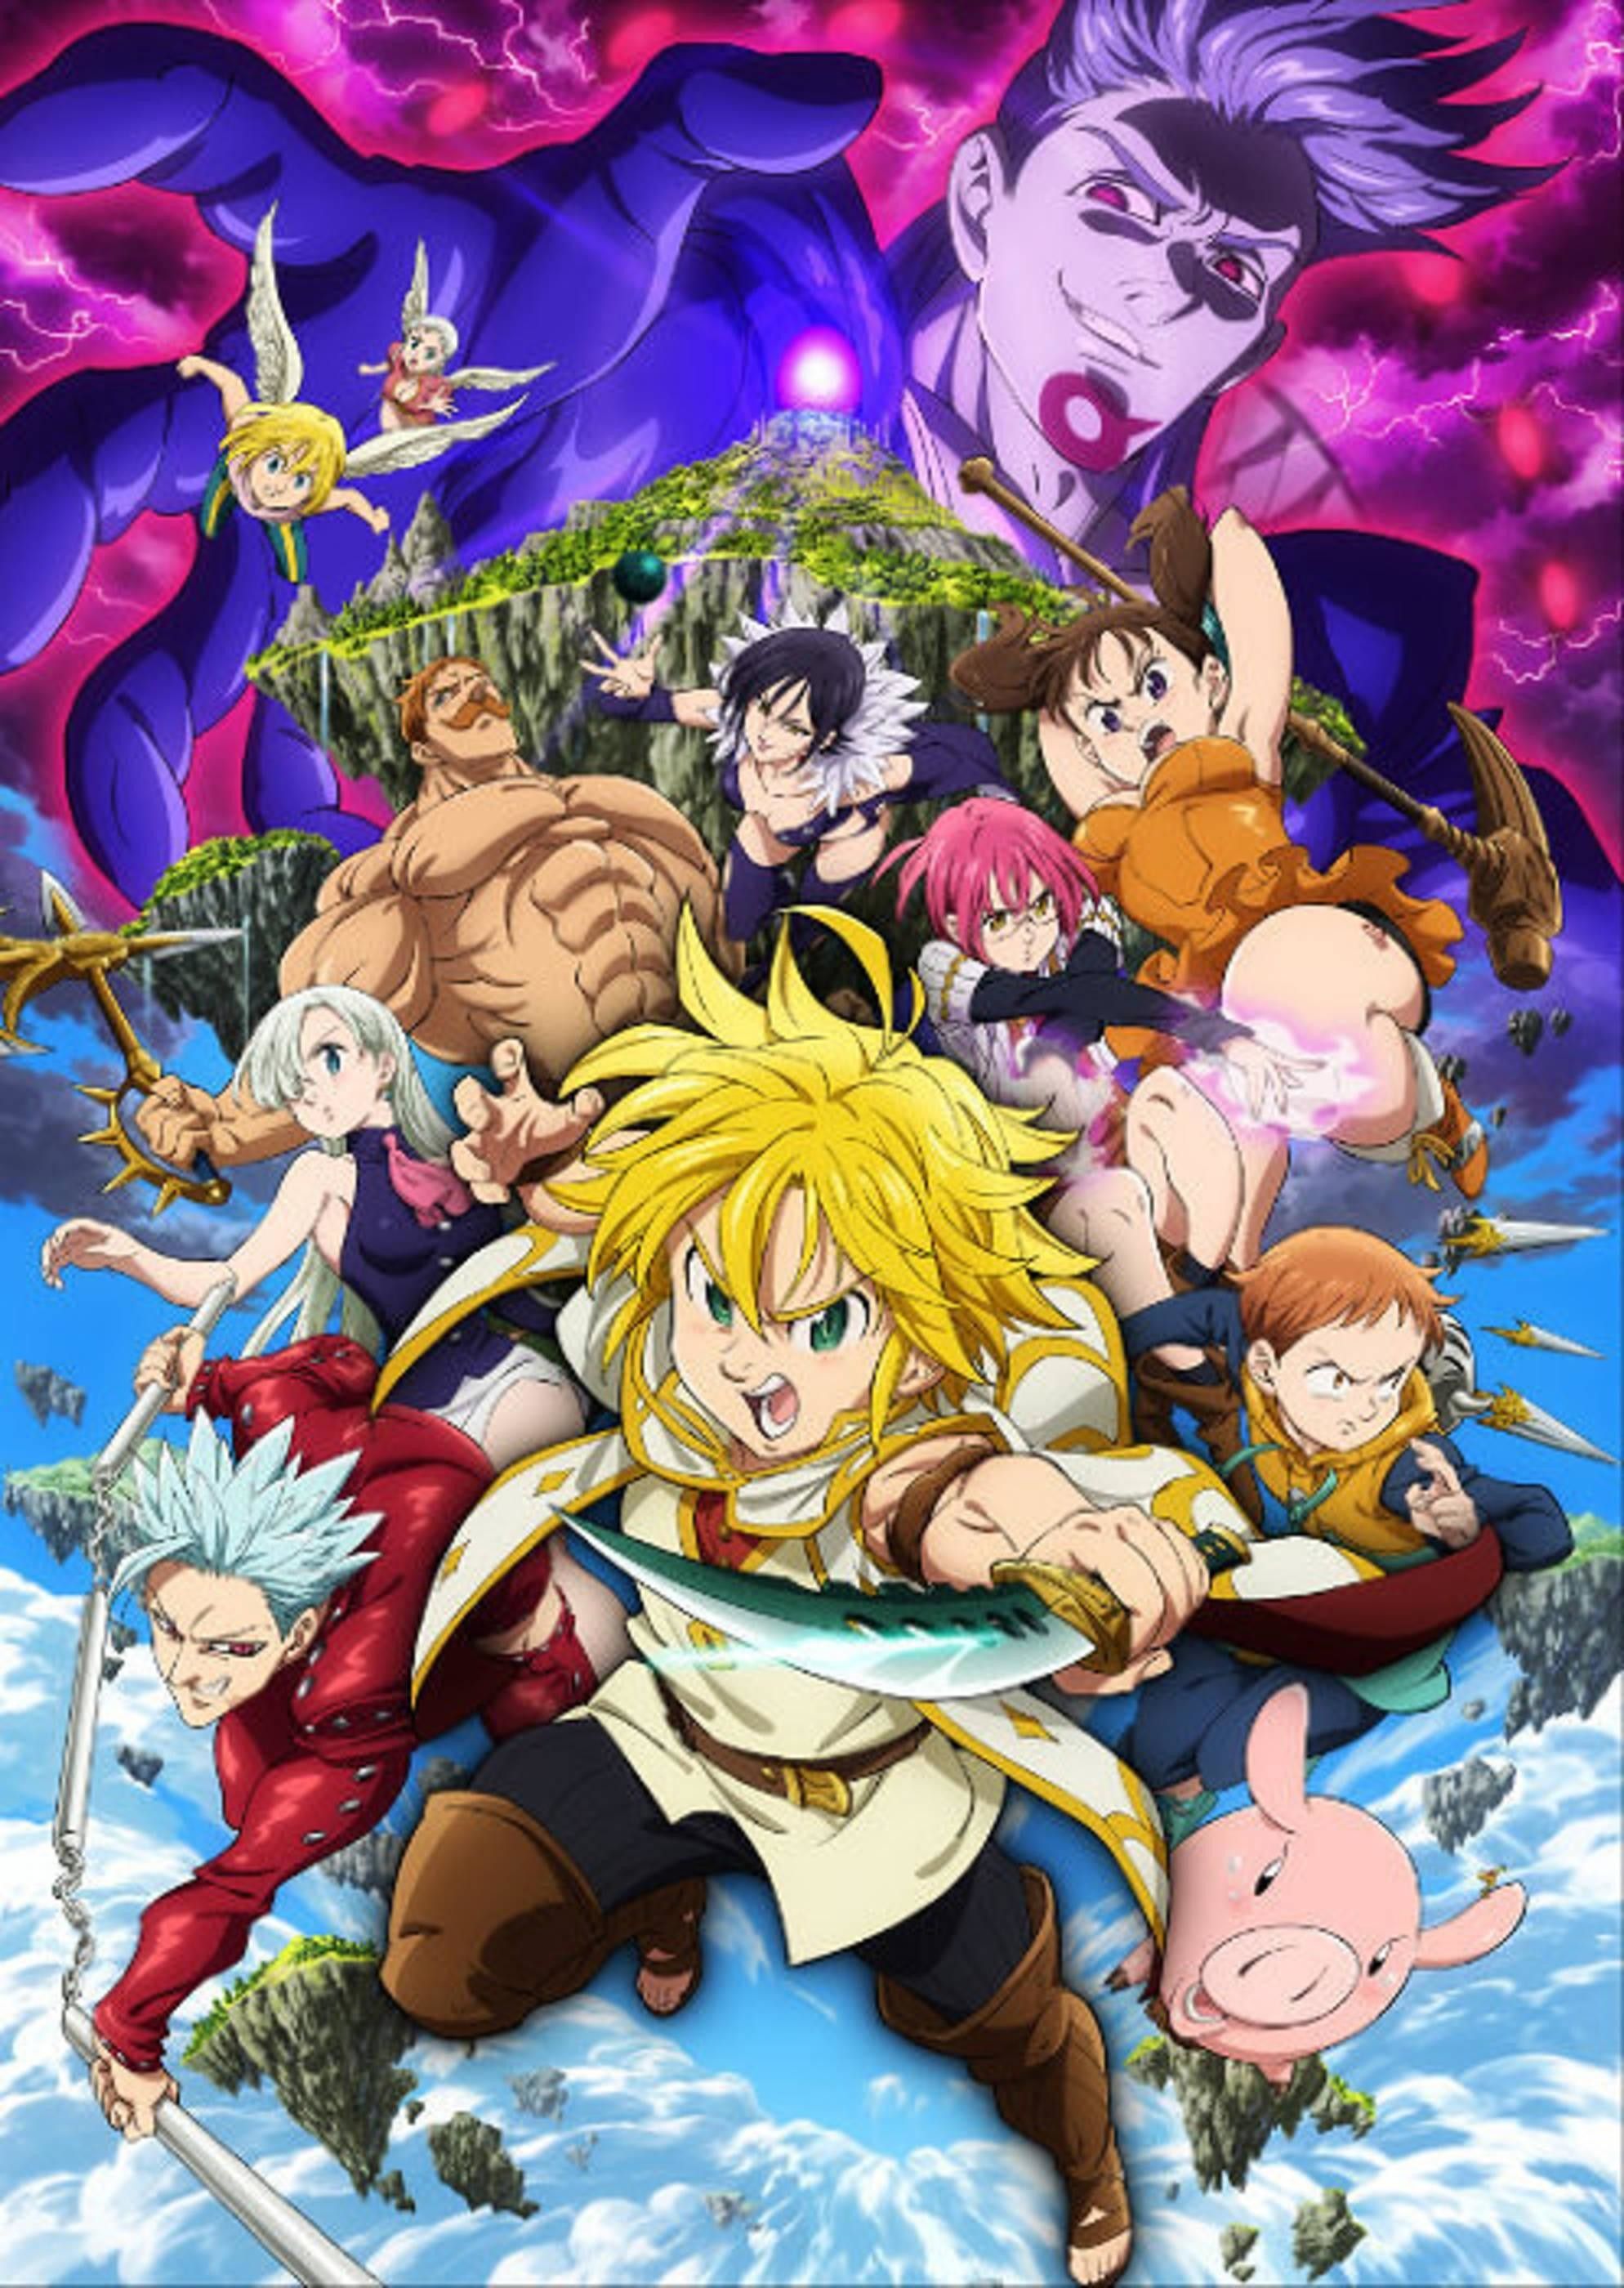 The Seven Deadly Sins iPhone Wallpapers - Wallpaper Cave